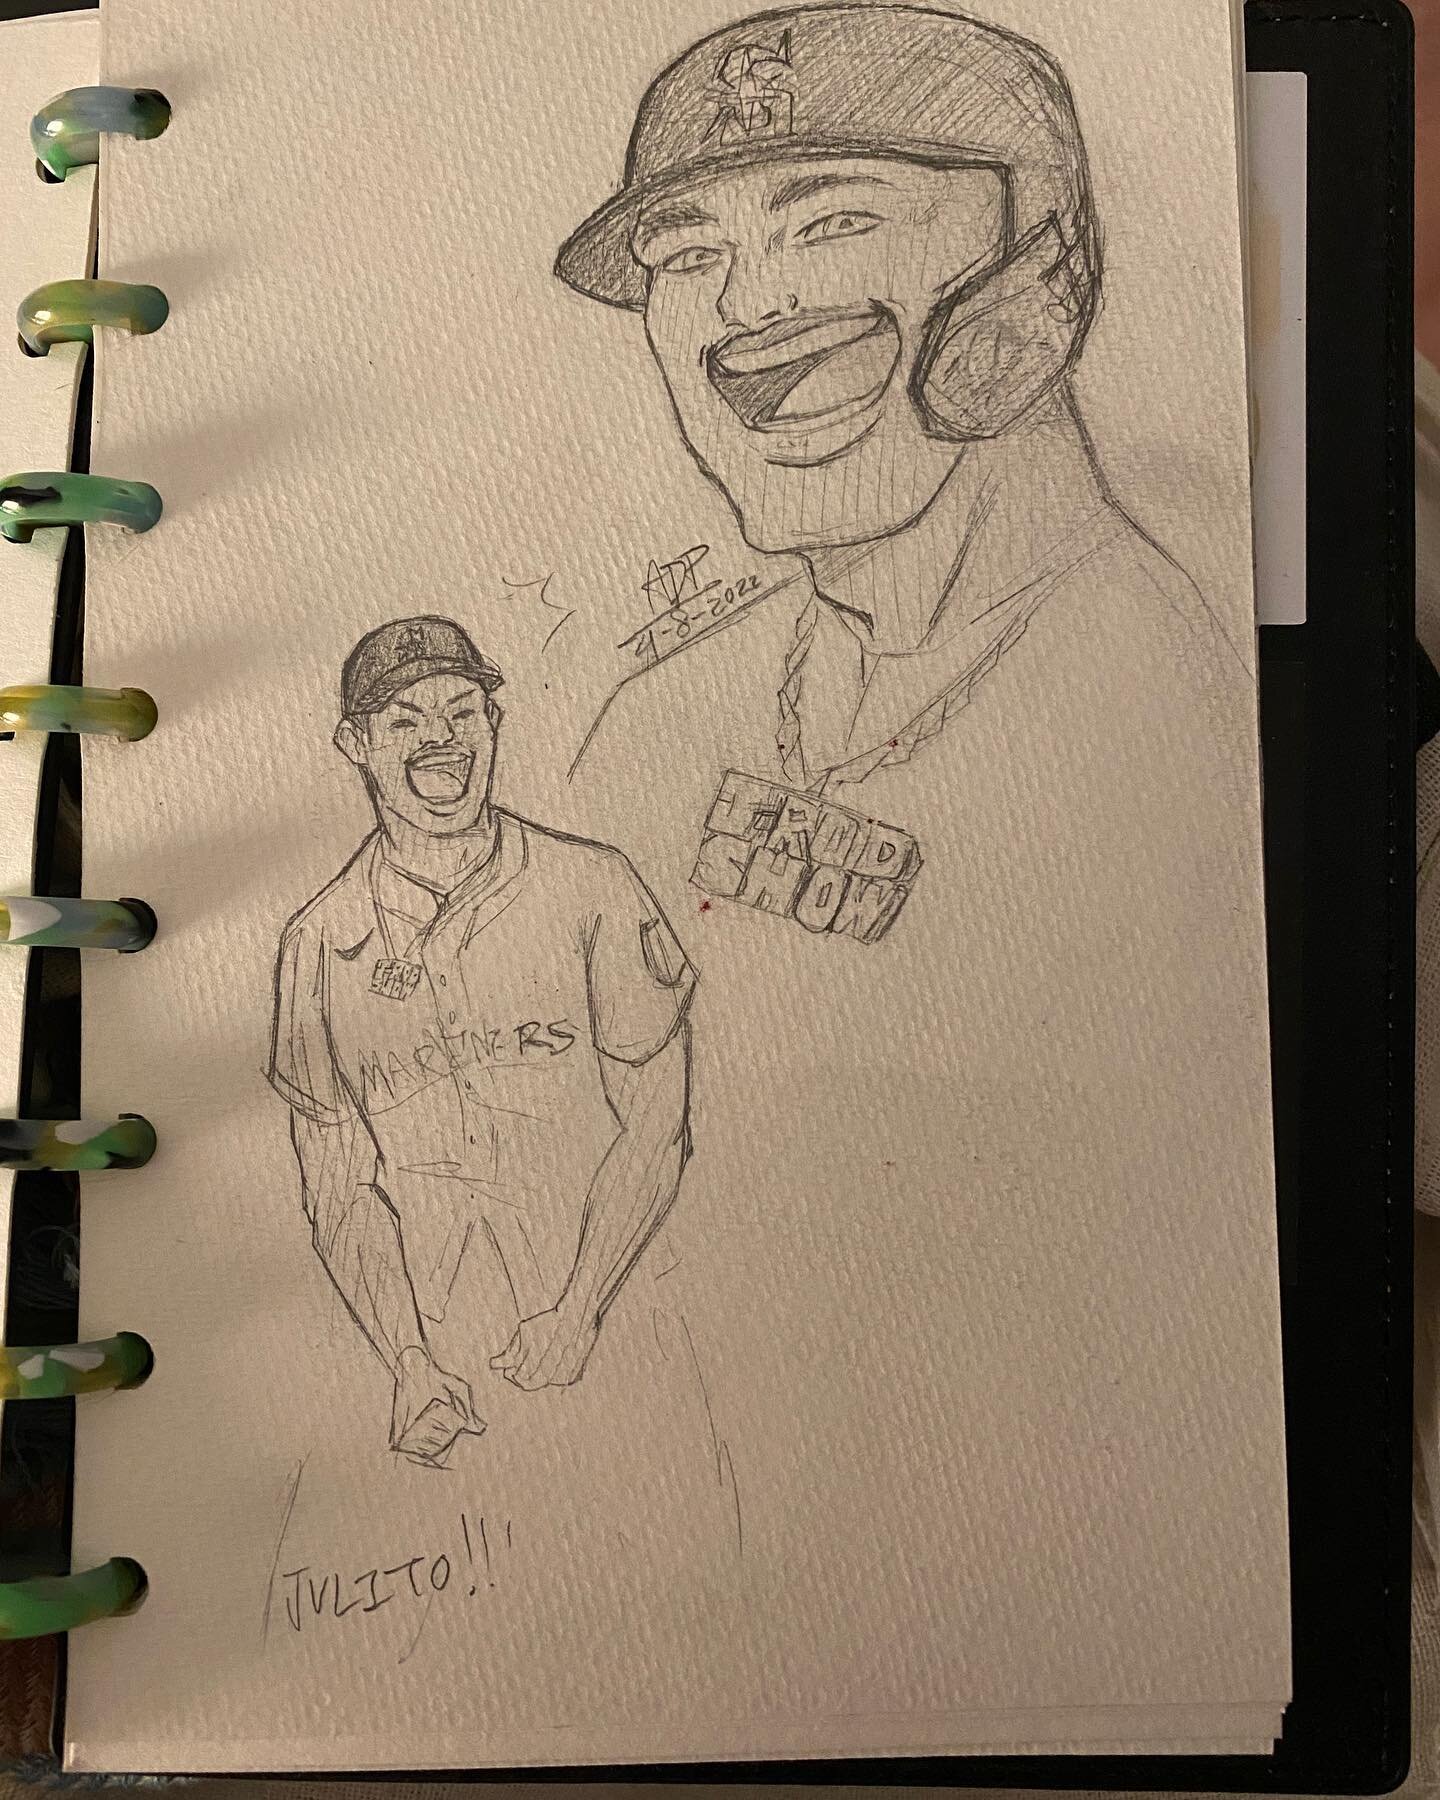 Julito, my boy, mi hijo, the absolute love of my life

(When I said I&rsquo;d hide in a corner and draw Julio for opening day I Was Not Kidding)

.
.
.
.
#gomariners #fanart #traditionalart #sketchbook #baseball